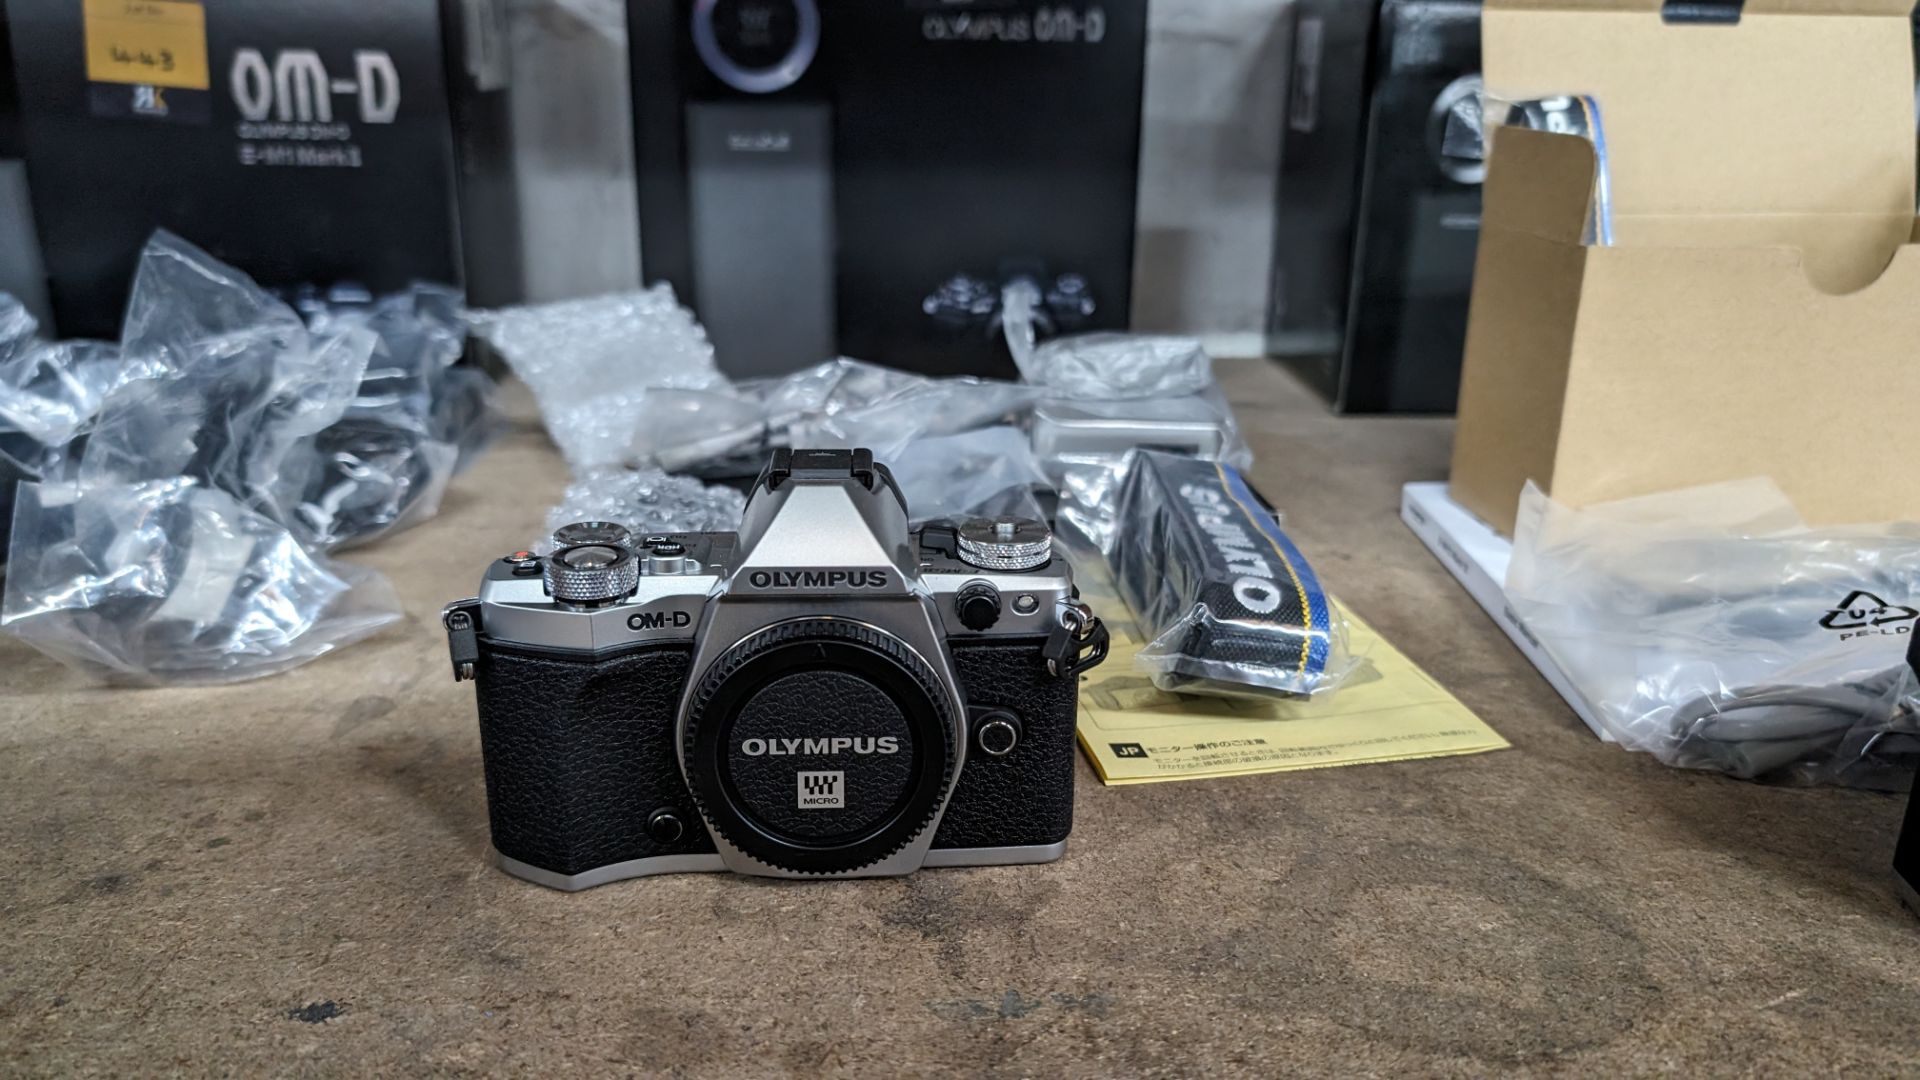 Olympus OM-D E-M5 Mark II camera kit, including camera body, electronic flash, strap, battery, charg